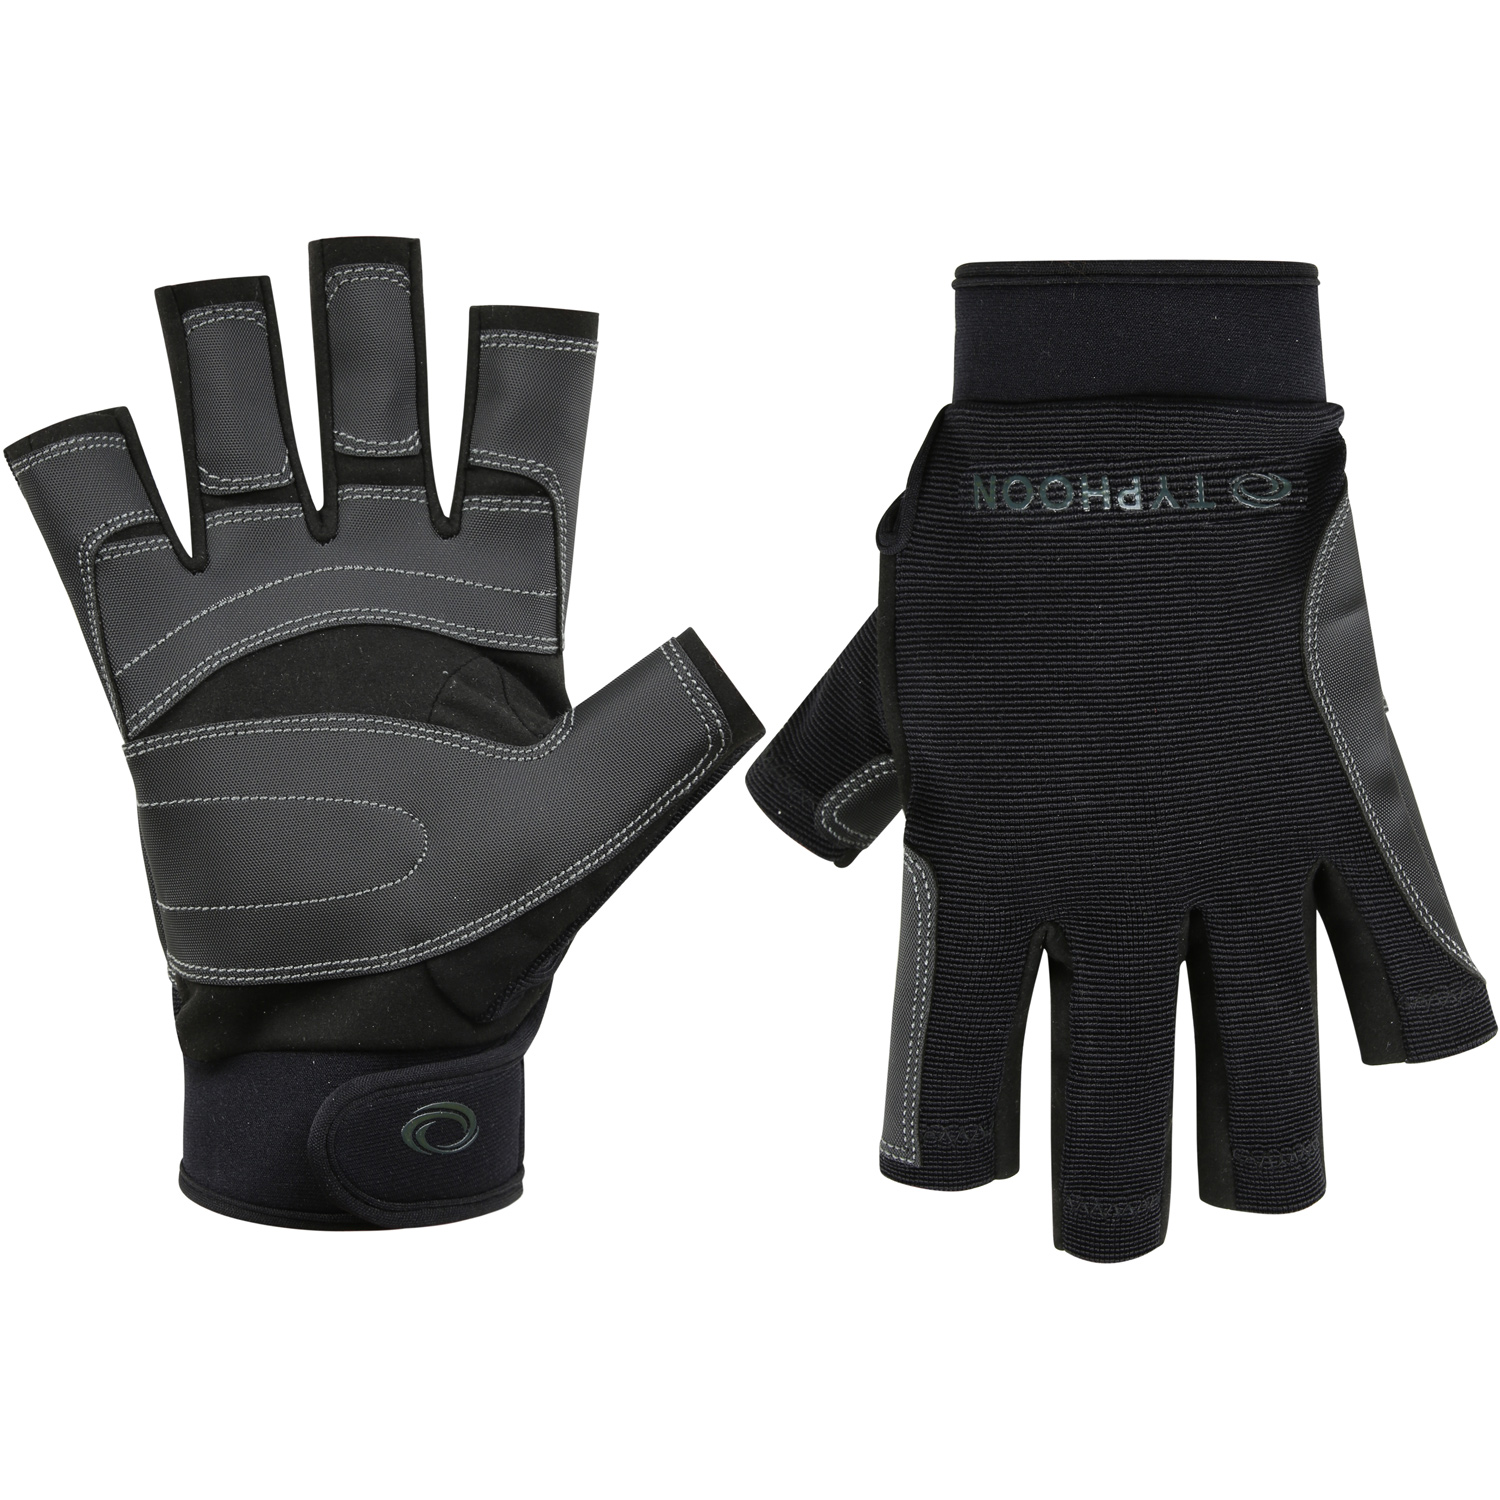 https://www.coastwatersports.com/images/products/2022-Typhoon-Towyn-Half-Finger-Sailing-Gloves-310251-4.jpg